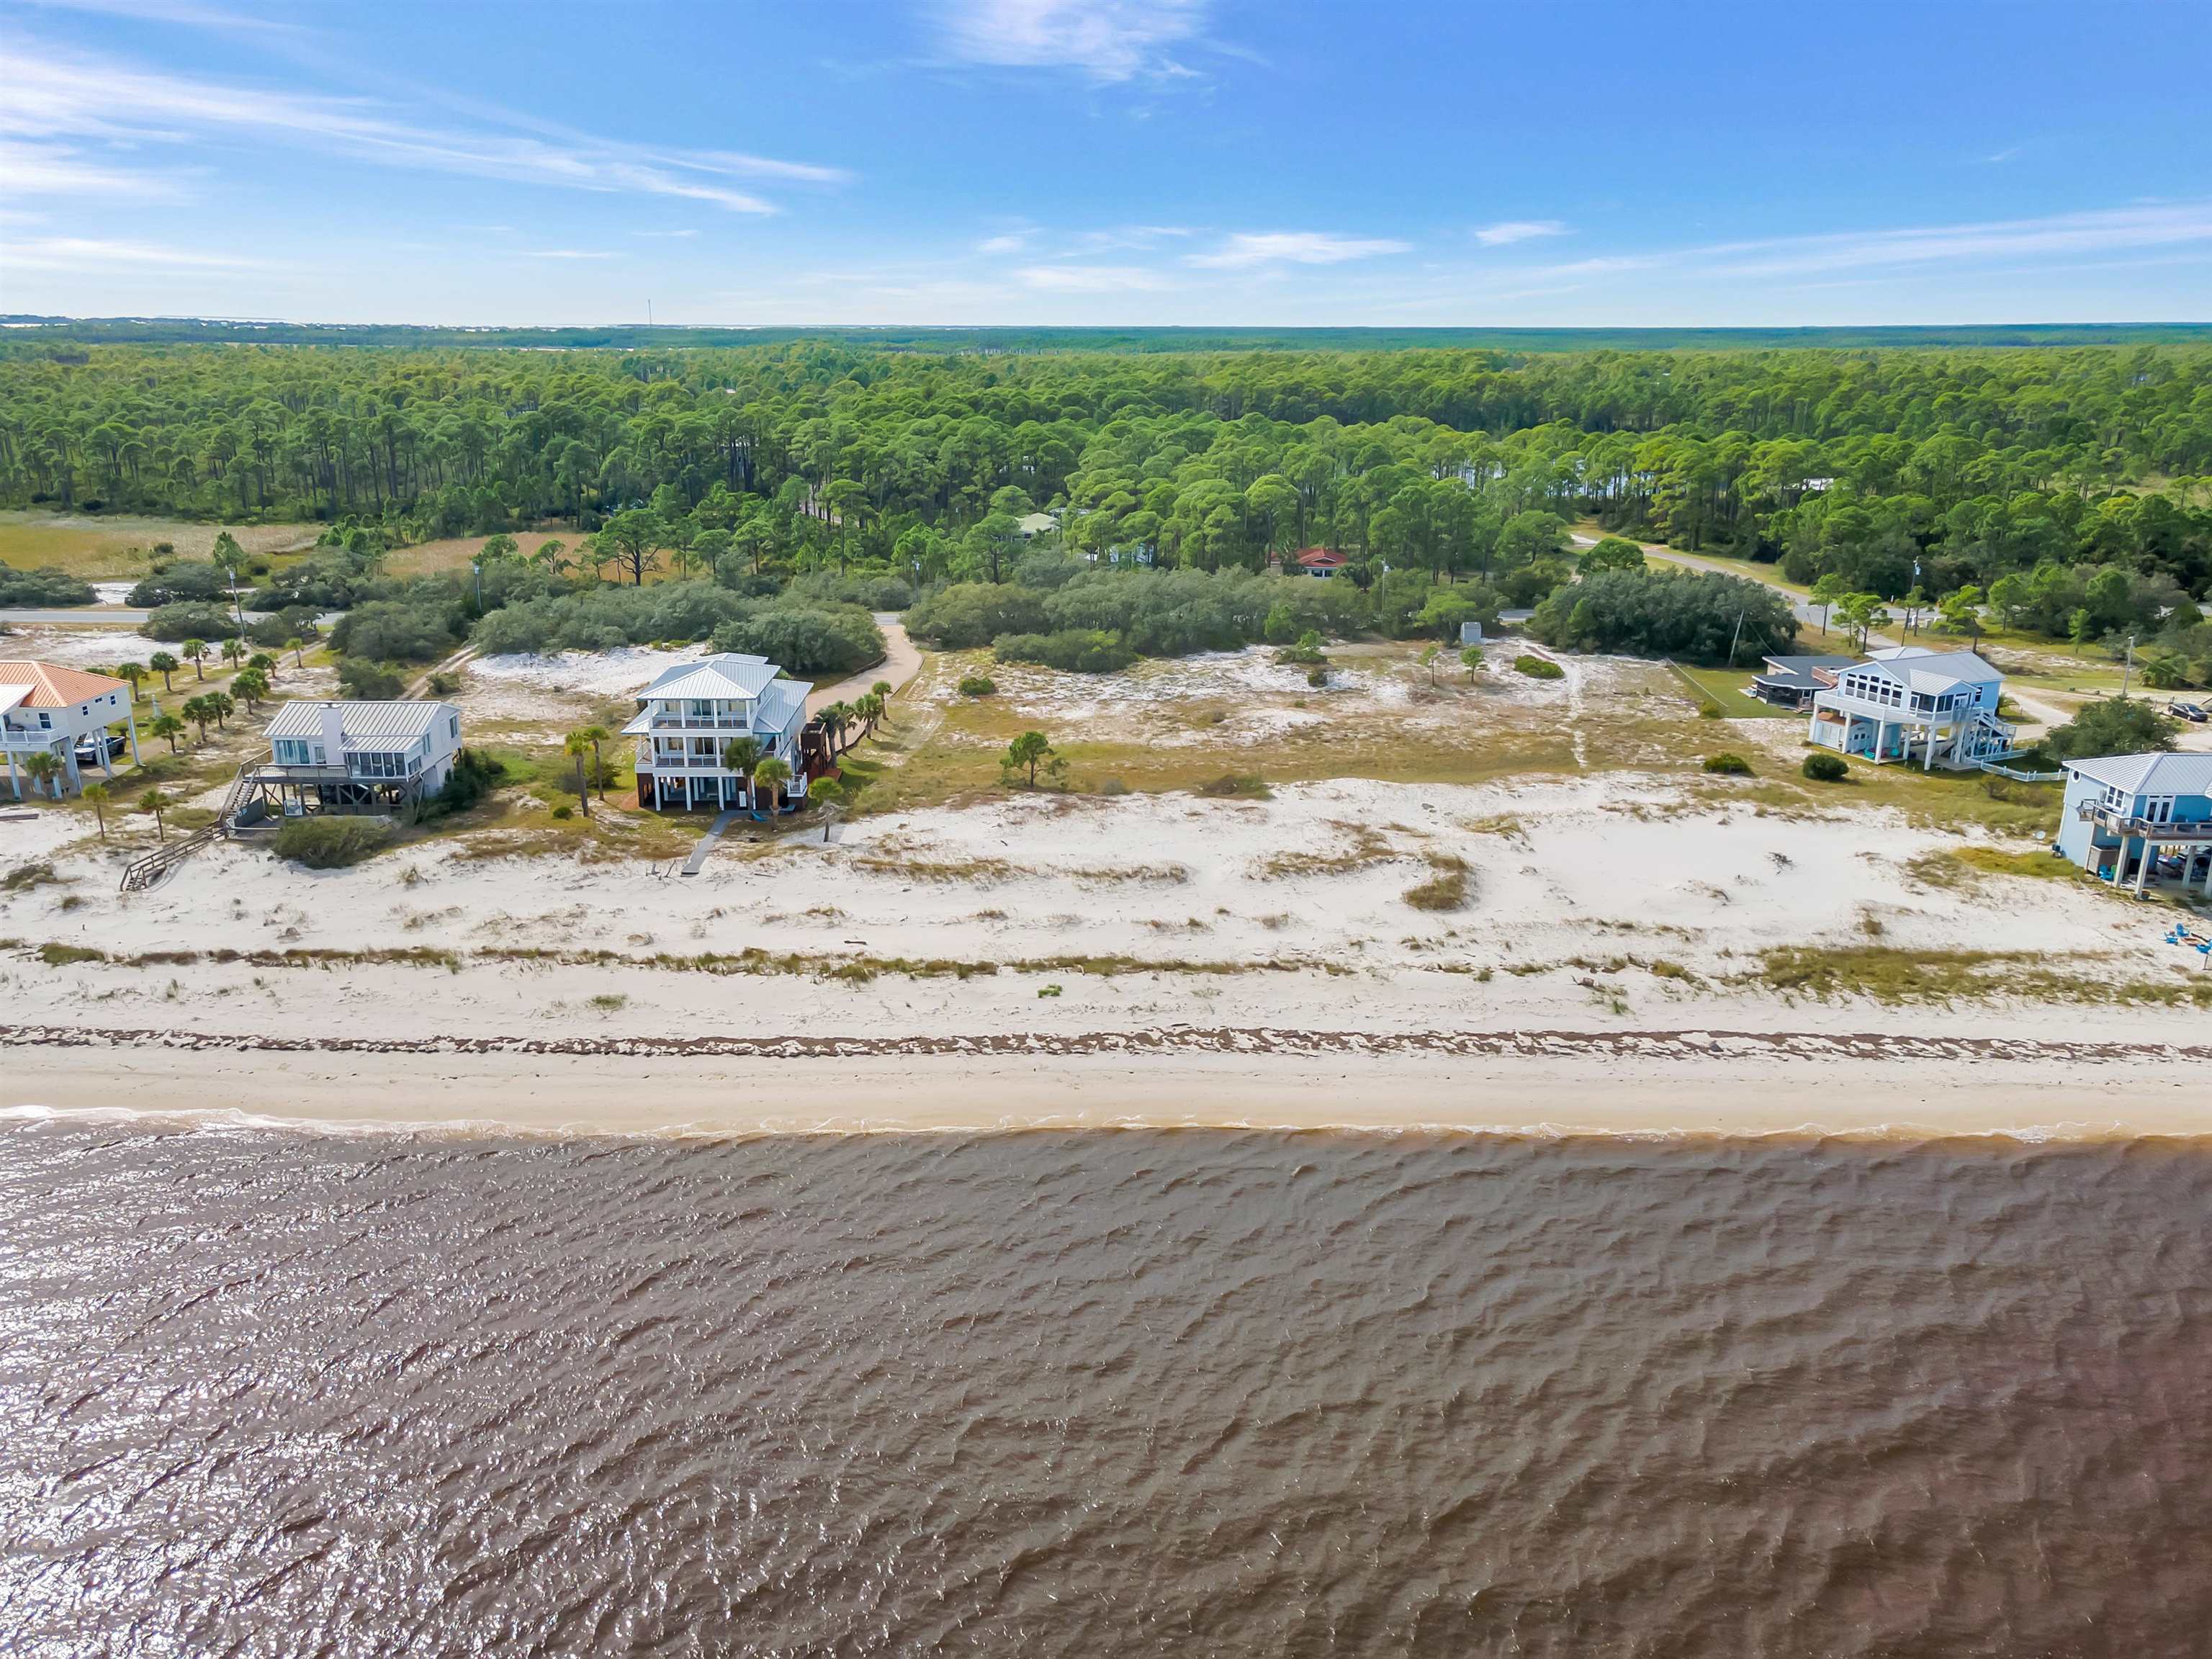 612 Bald Point,ALLIGATOR POINT,Florida 32346,Lots and land,Bald Point,364410